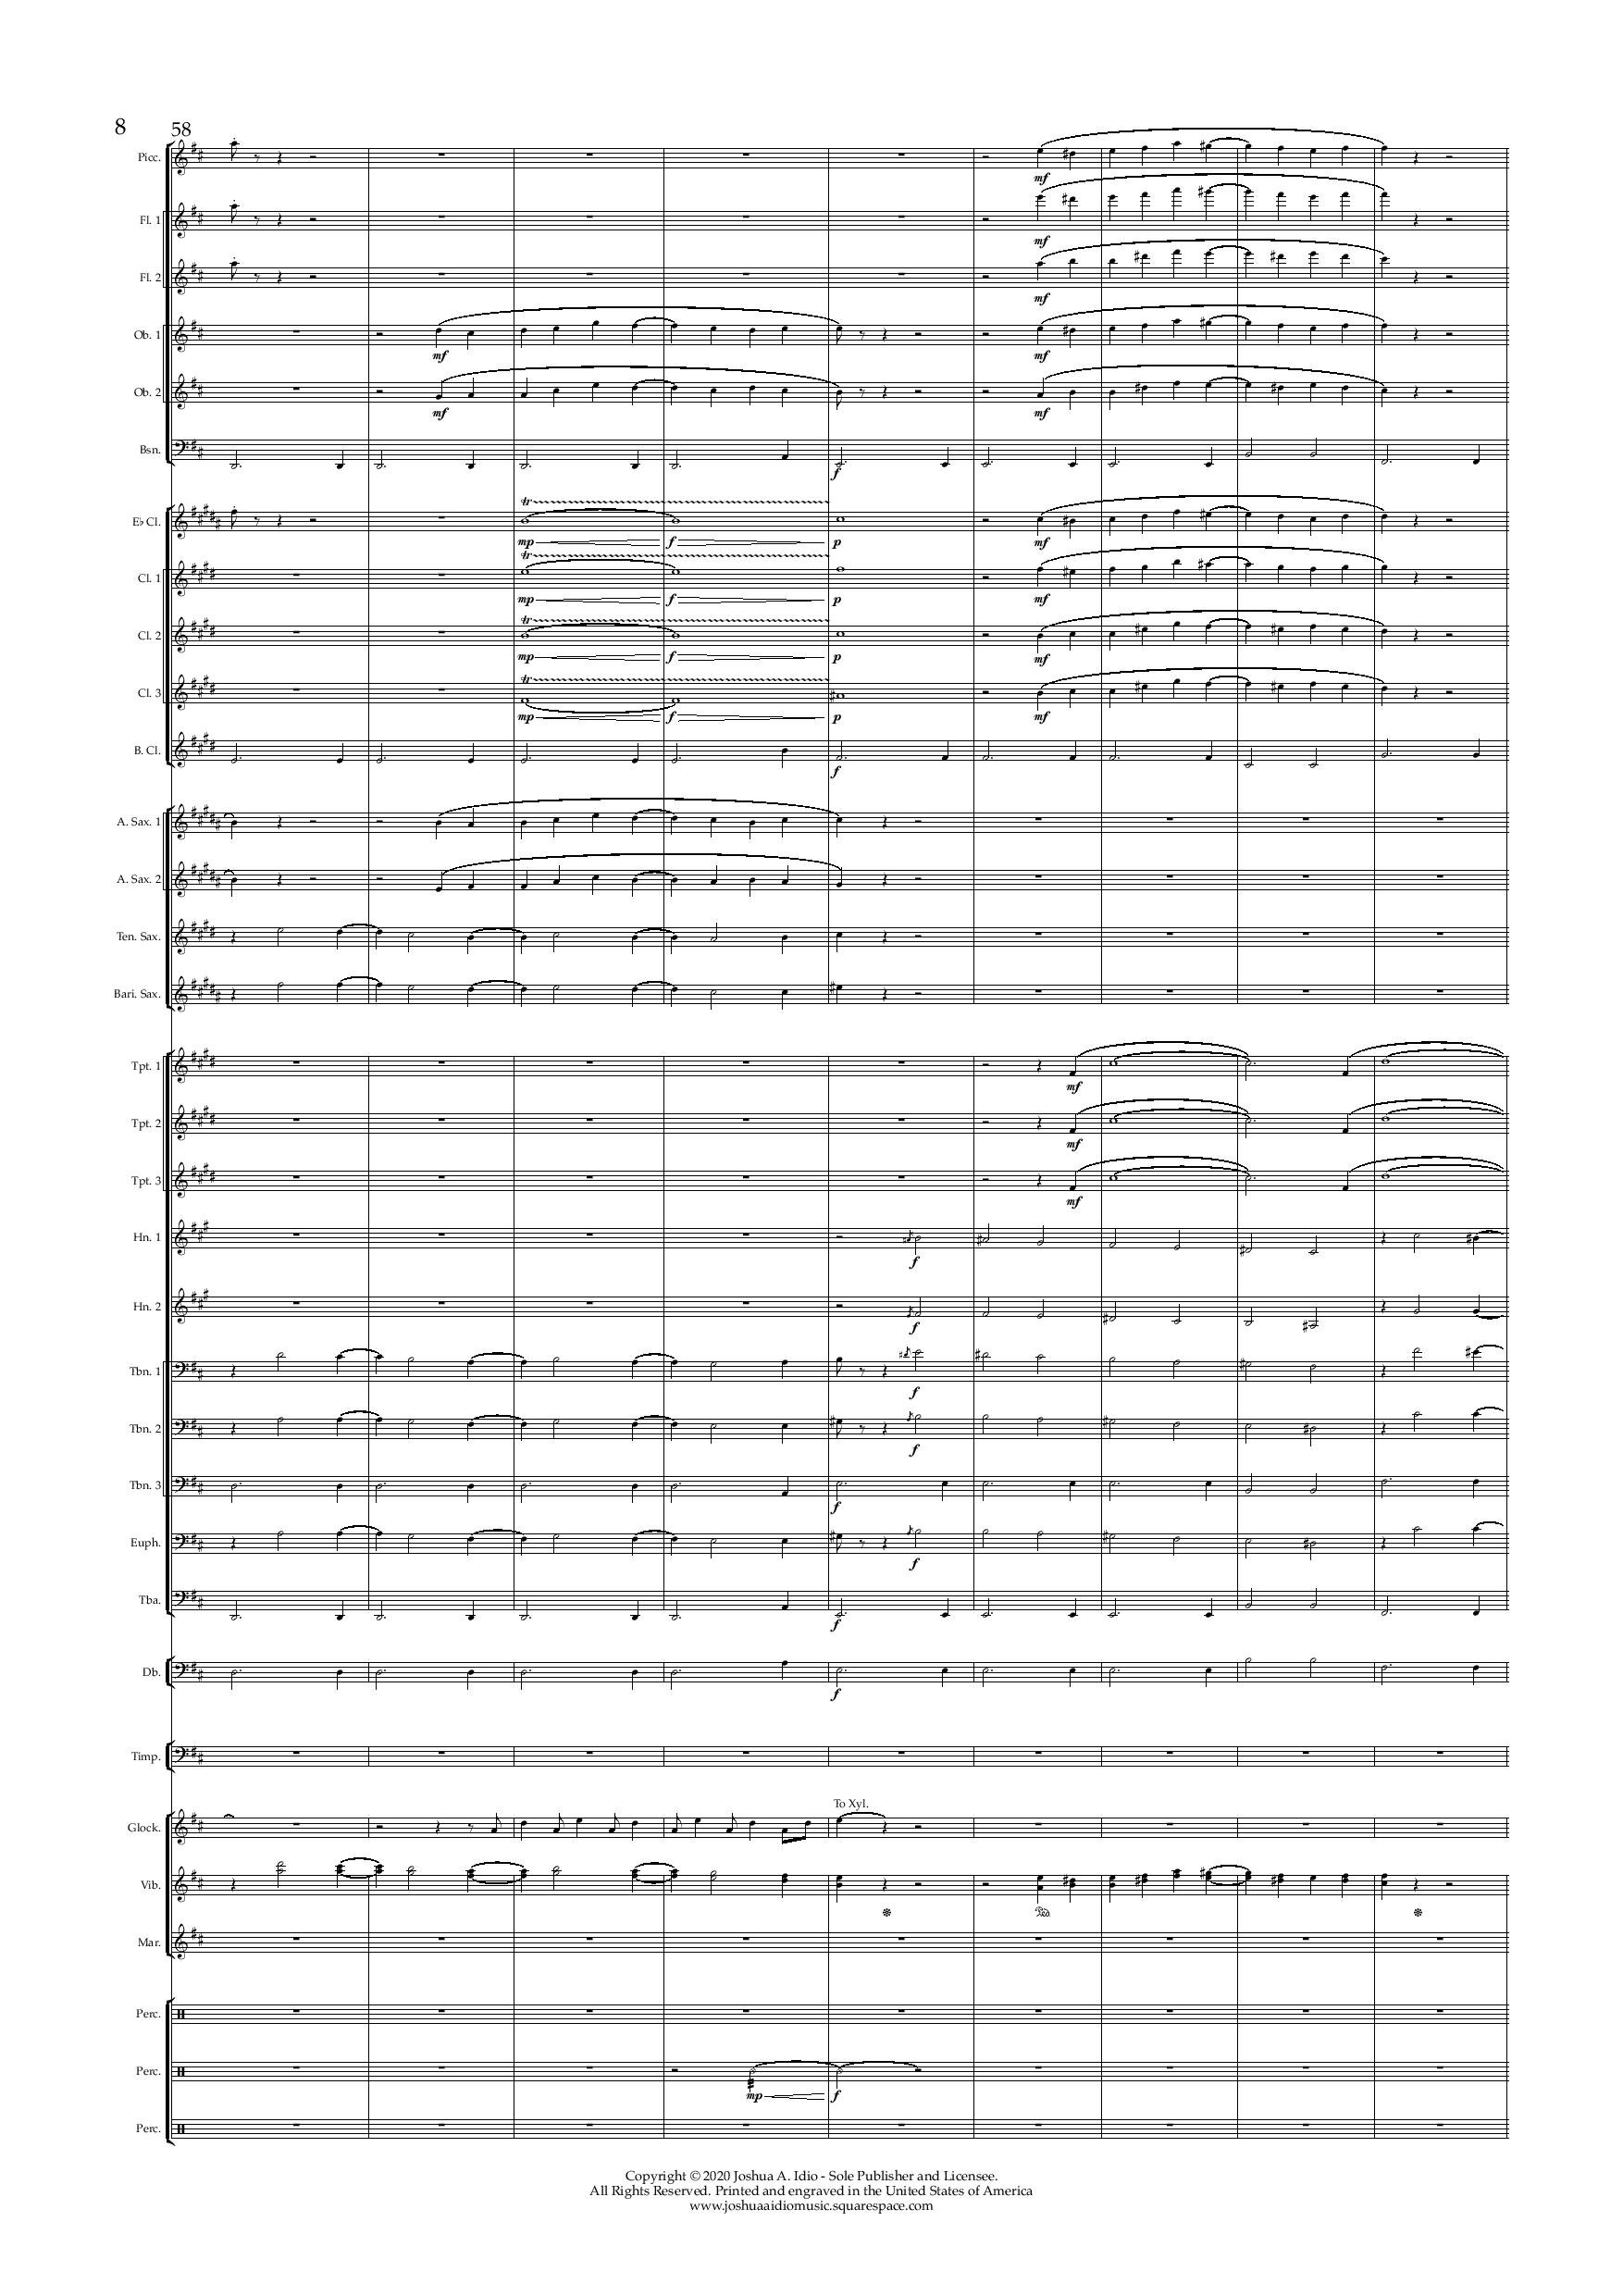 The Cruise Line Dream - Conductor s Score-page-008.jpg